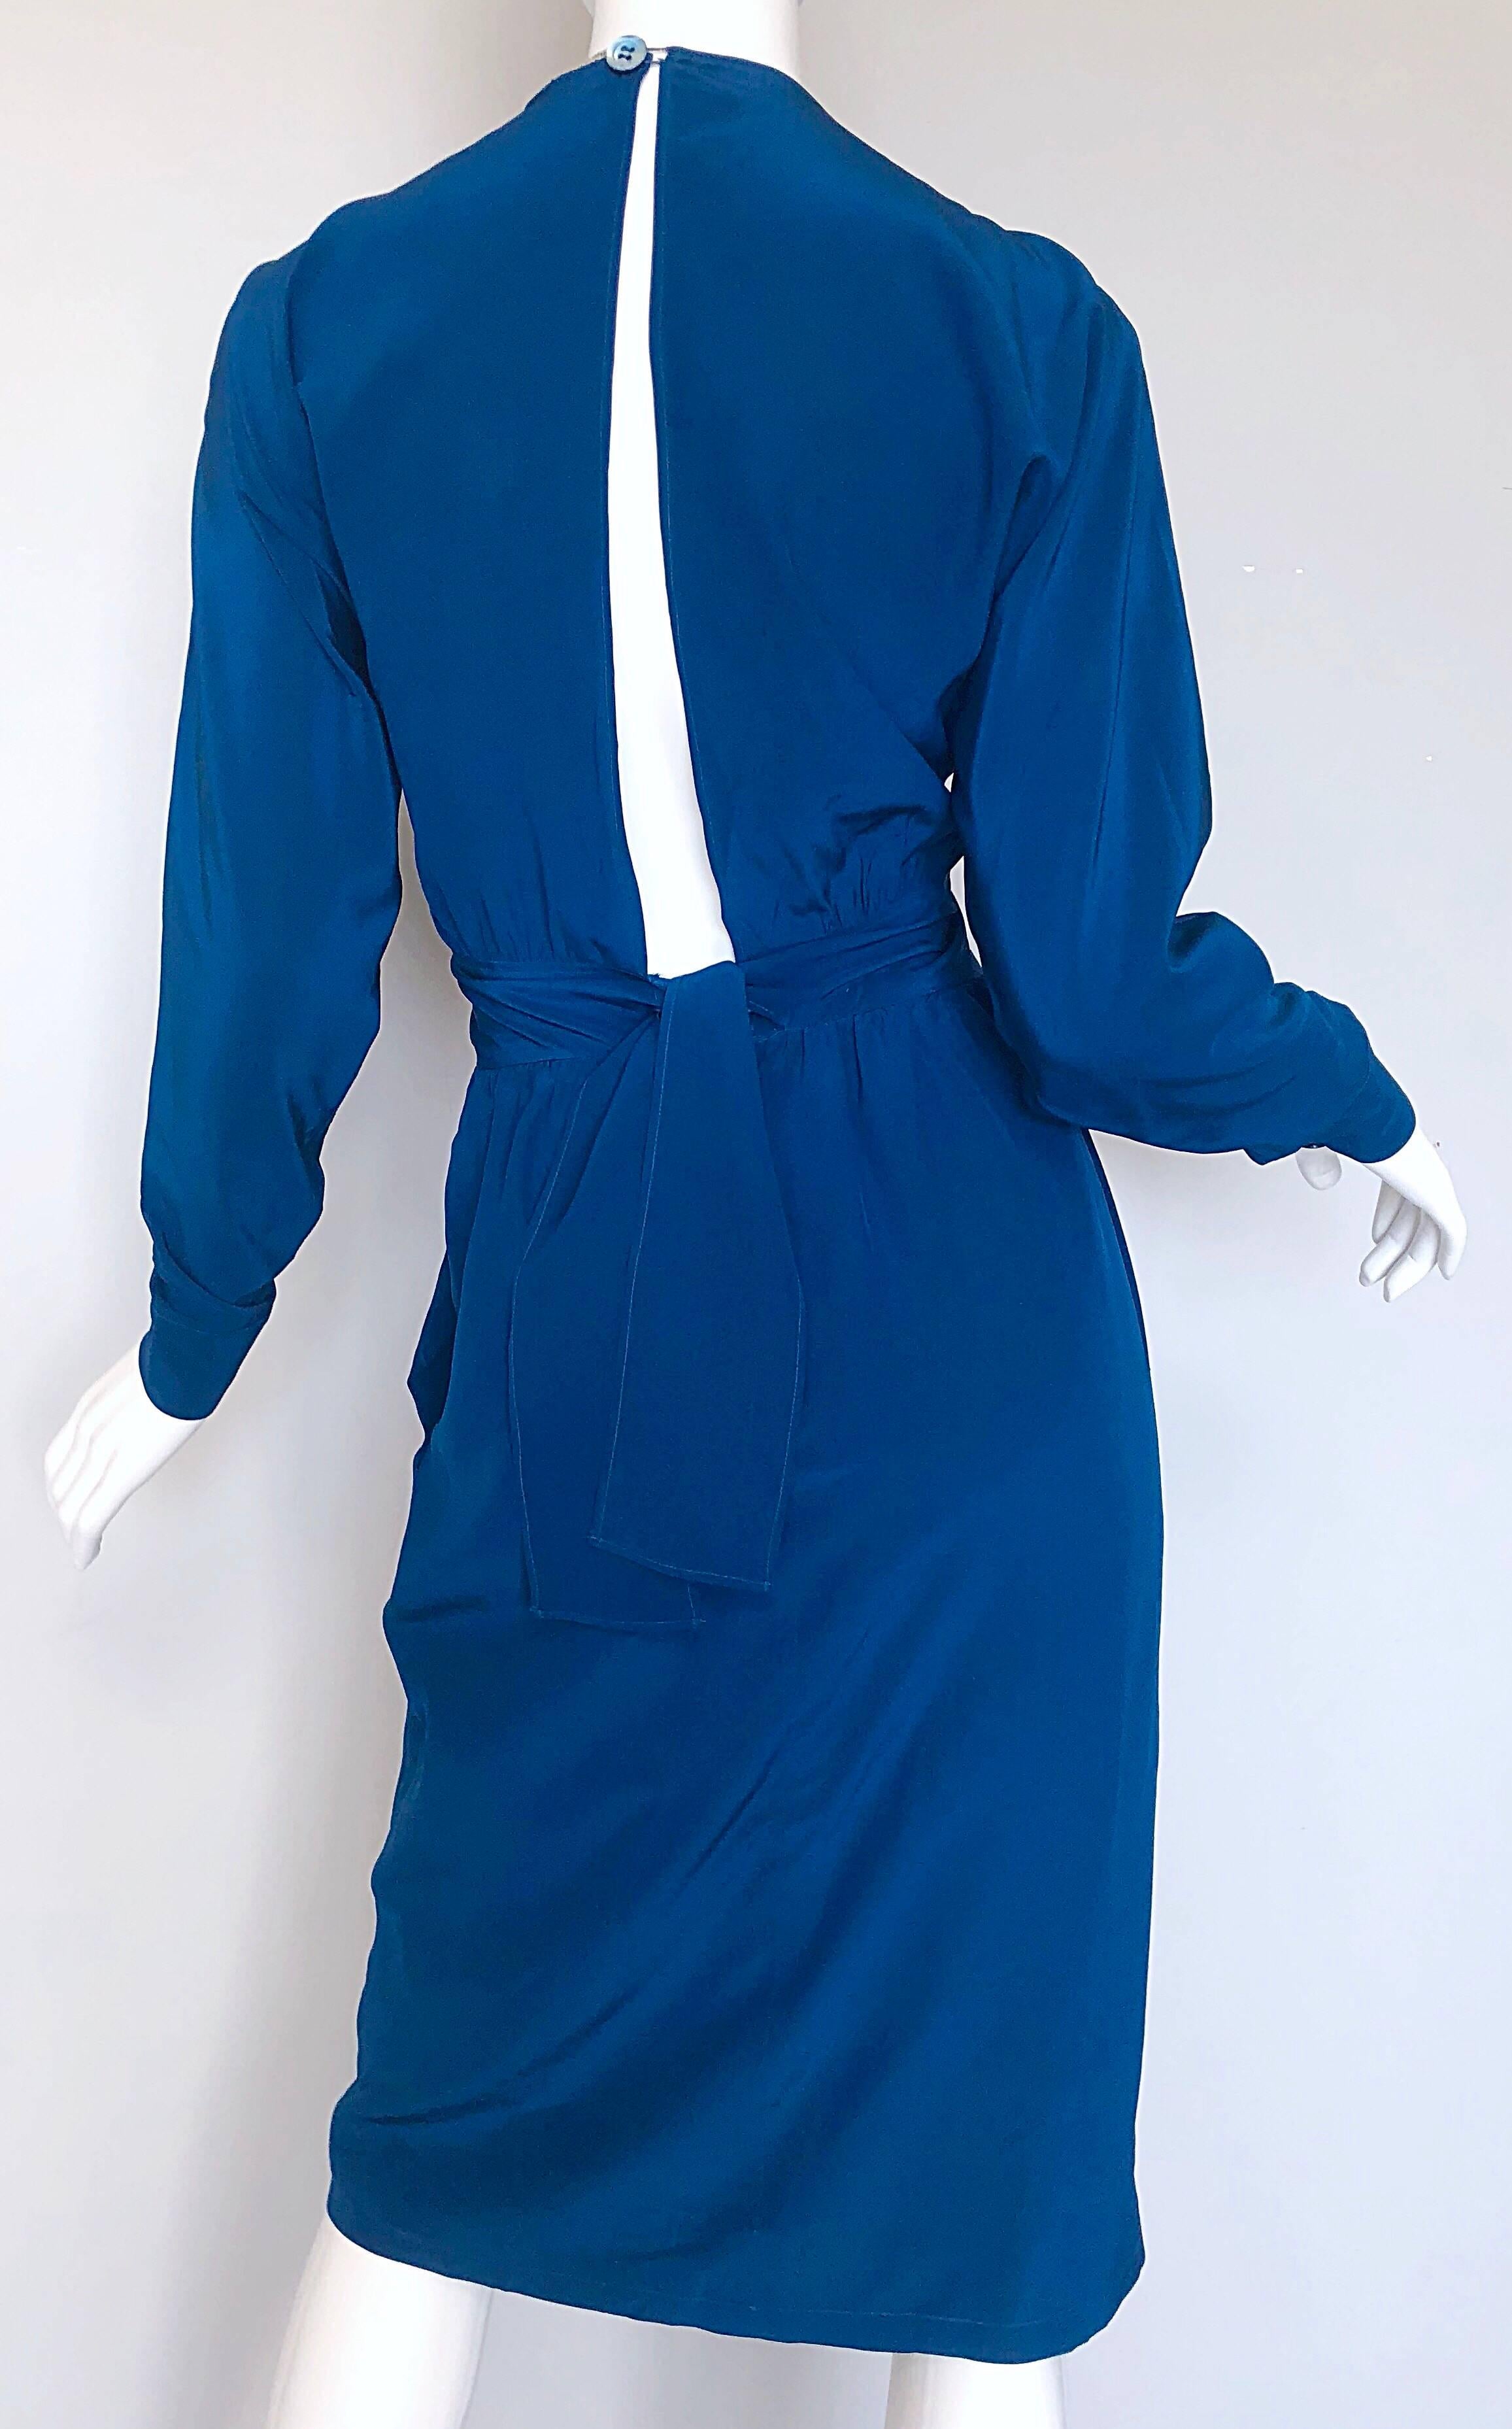 Alan Austin 1970s Cerulean Blue Italian Open Back Long Sleeve Vintage Silk Dress In Excellent Condition For Sale In San Diego, CA